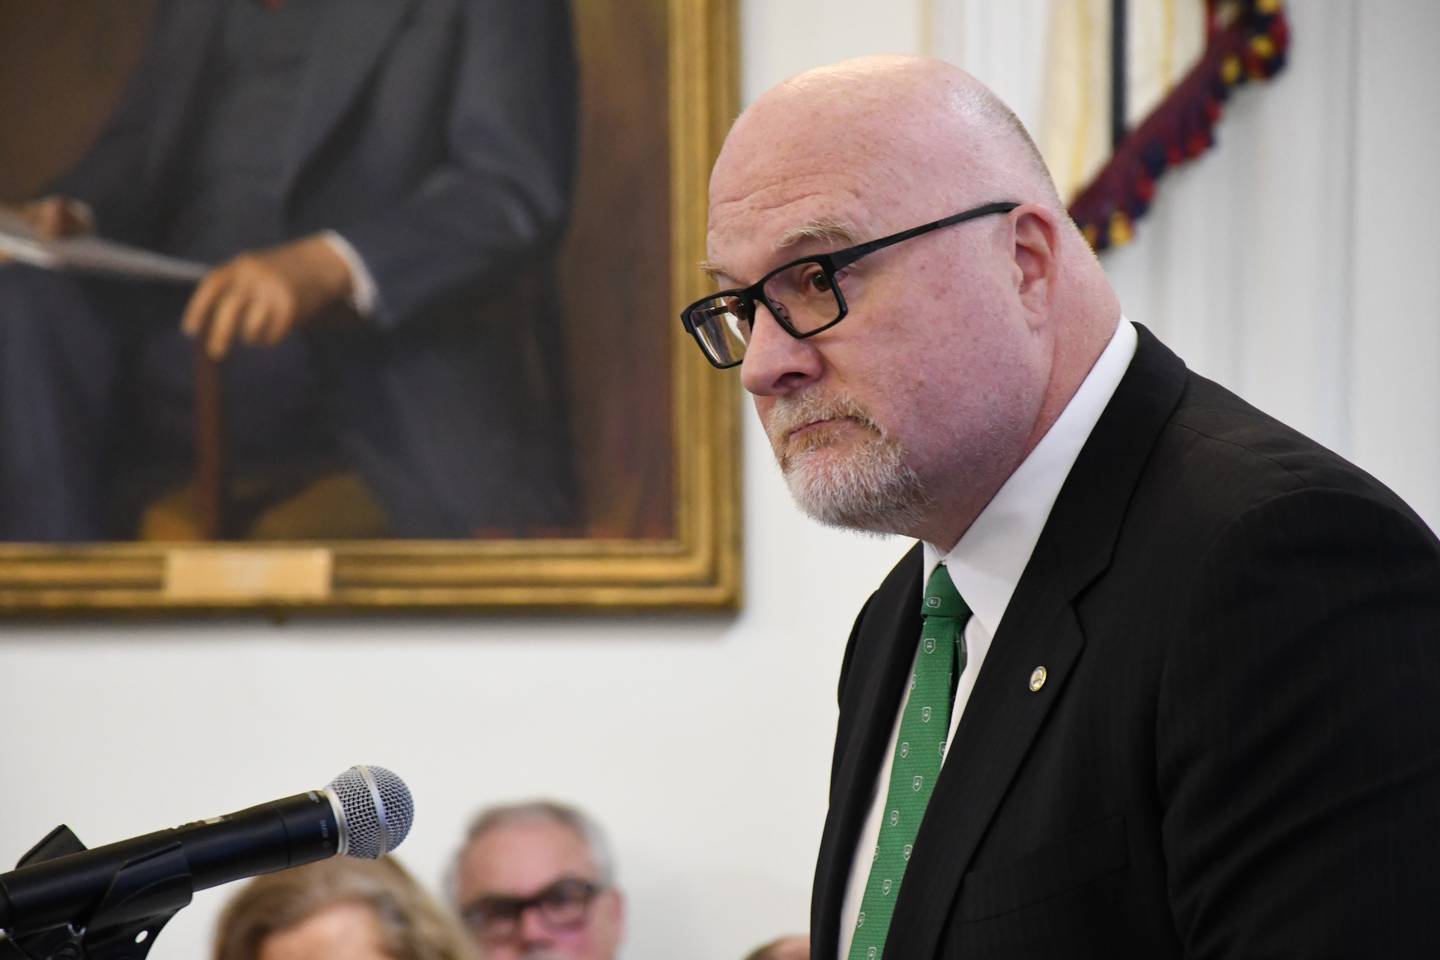 Patrick Moran of the AFSCME union representing correctional officers speaks at a Maryland Board of Public Works meeting at the State House in Annapolis on Wednesday, March 13, 2024. Thousands of correctional officers were awarded millions in back pay.